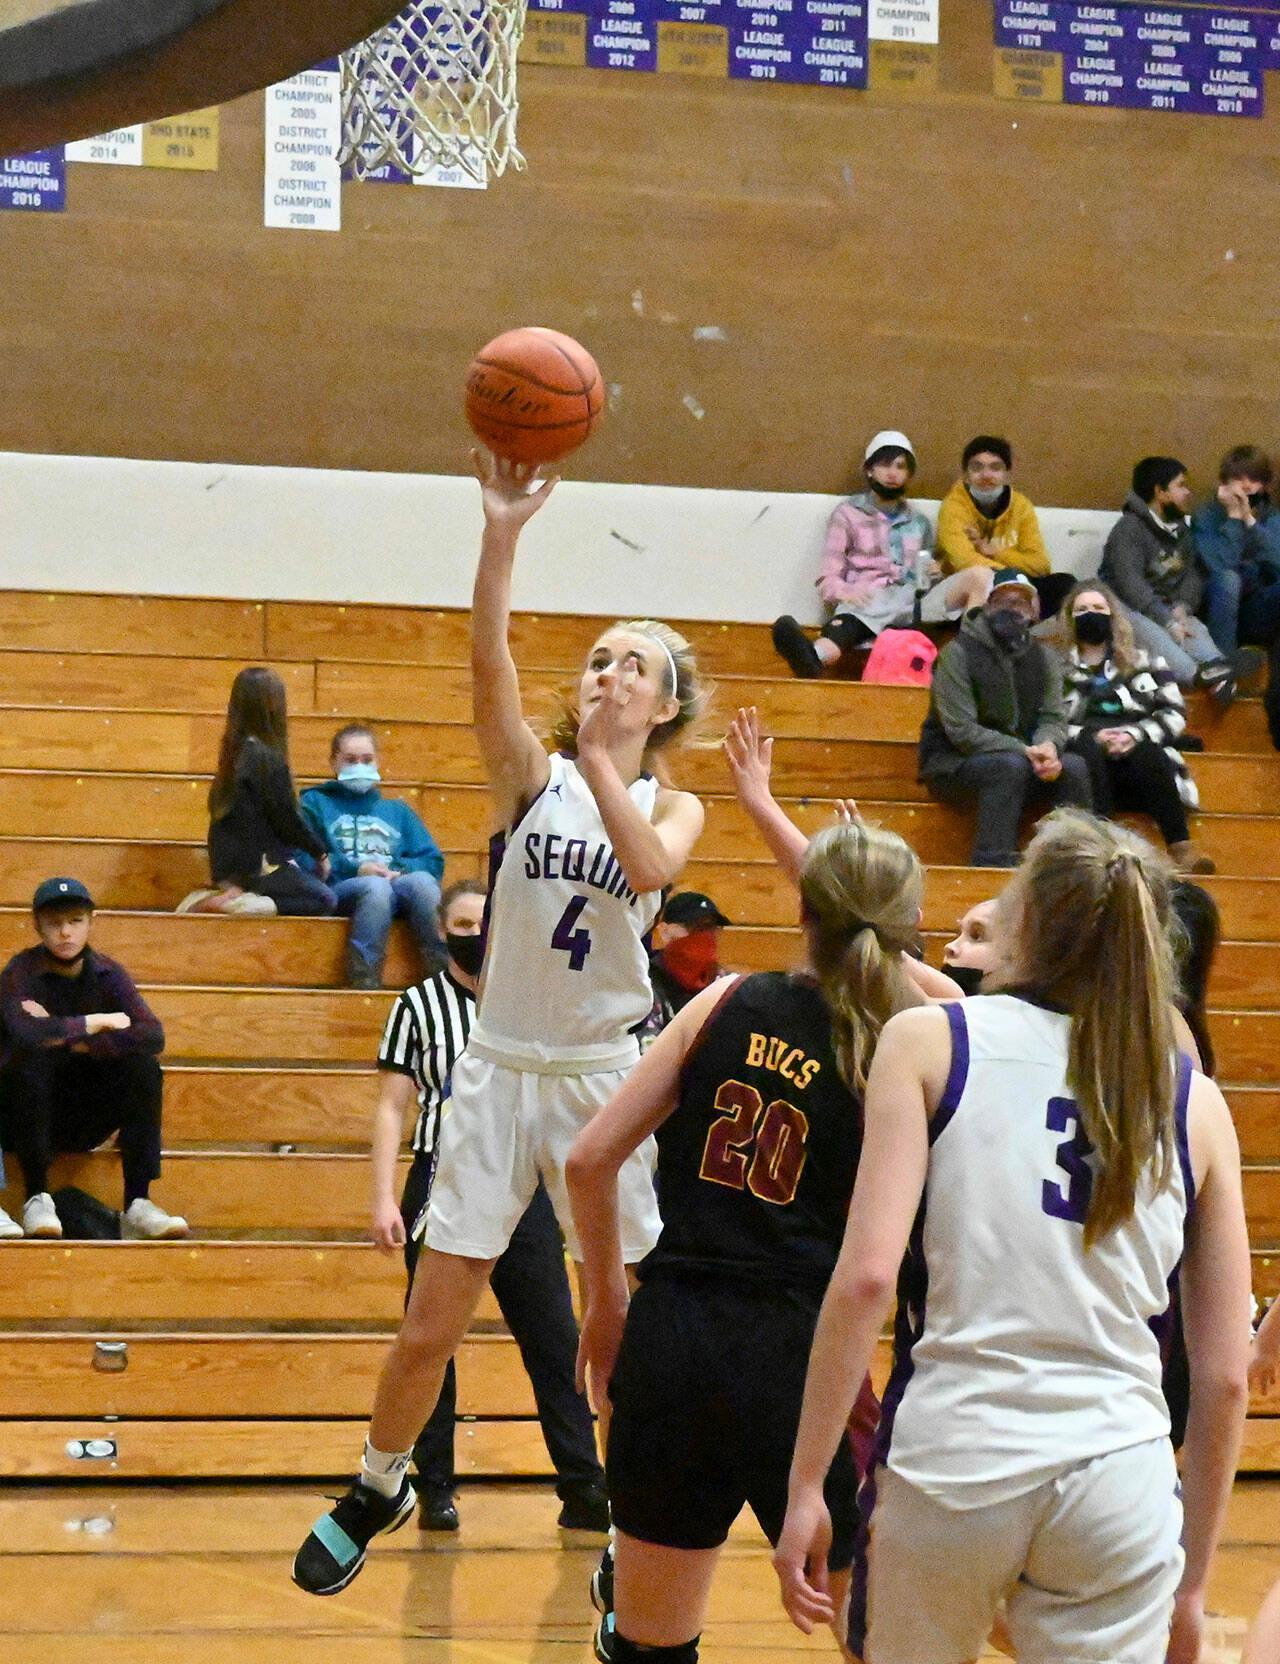 In a Feb. 8 non-league game in Sequim, Sequim’s Hannah Wagner (4) puts up a shot as Kingston’s Ellee Brockman (20) and Sequim’s Jolene Vaara look on. Sequim Gazette photo by Michael Dashiell